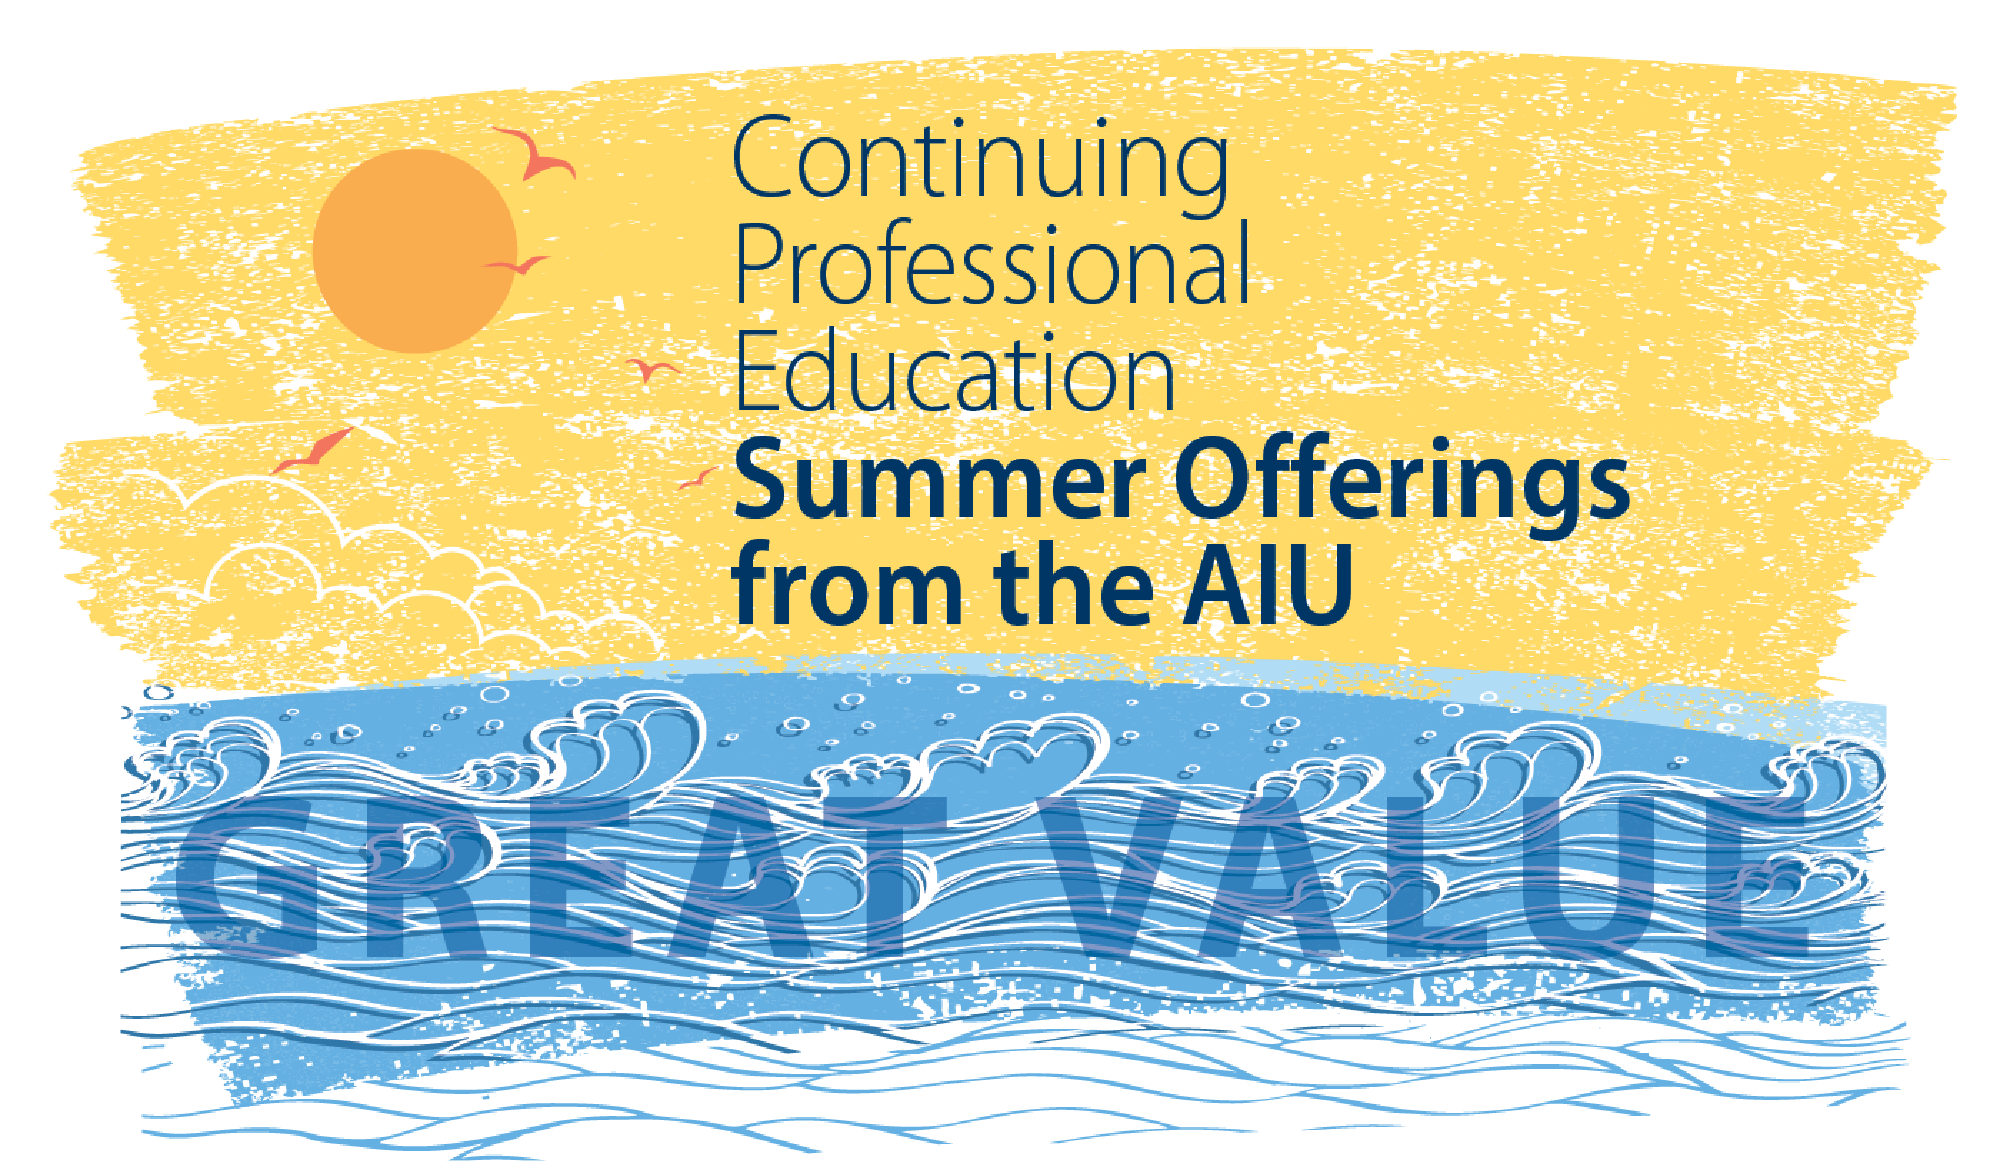 Continuing Professional Education Summer Offerings from the AIU -- Great Value